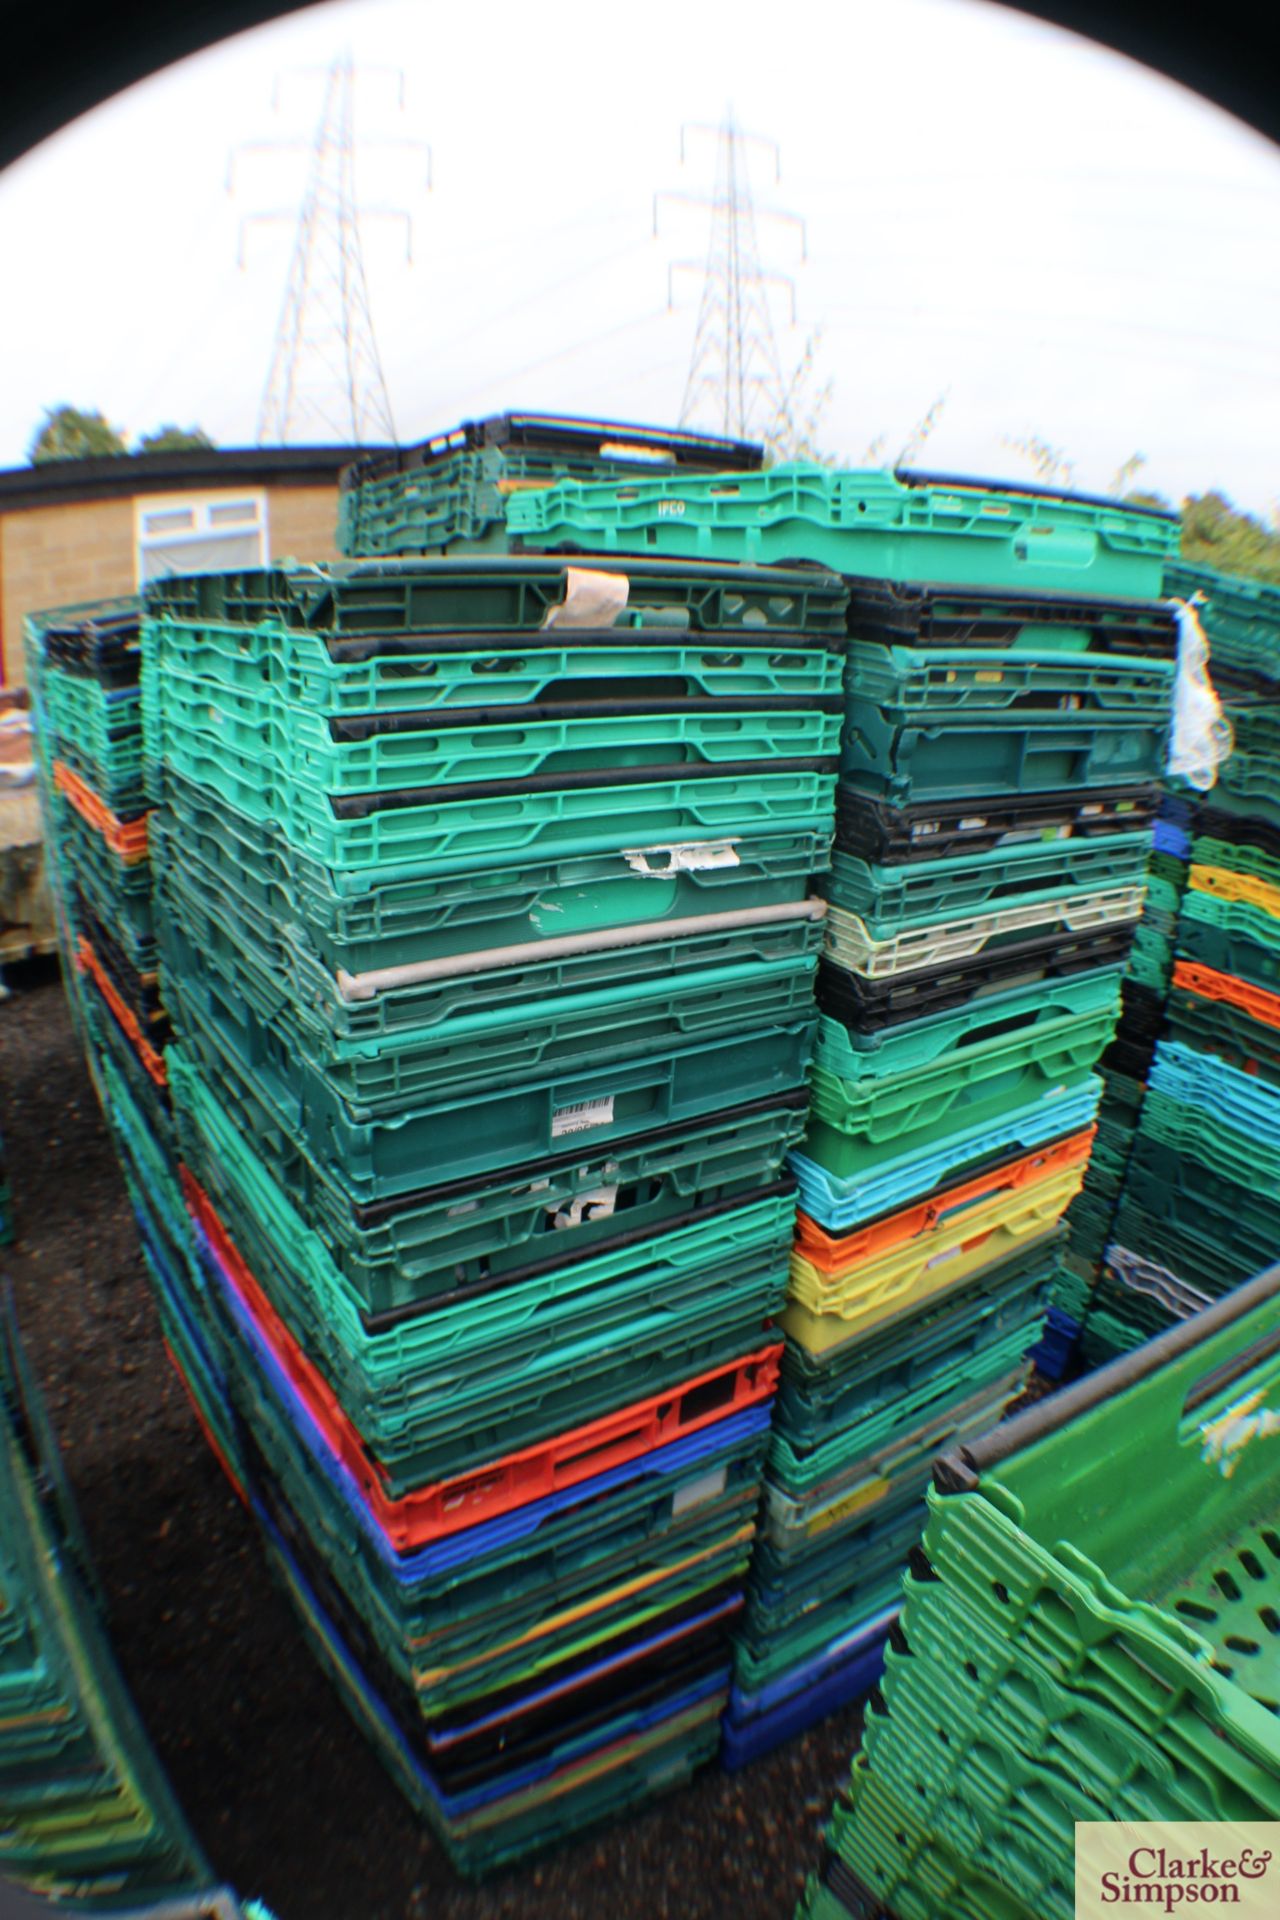 100x vegetable/ produce stacking crates. - Image 2 of 2